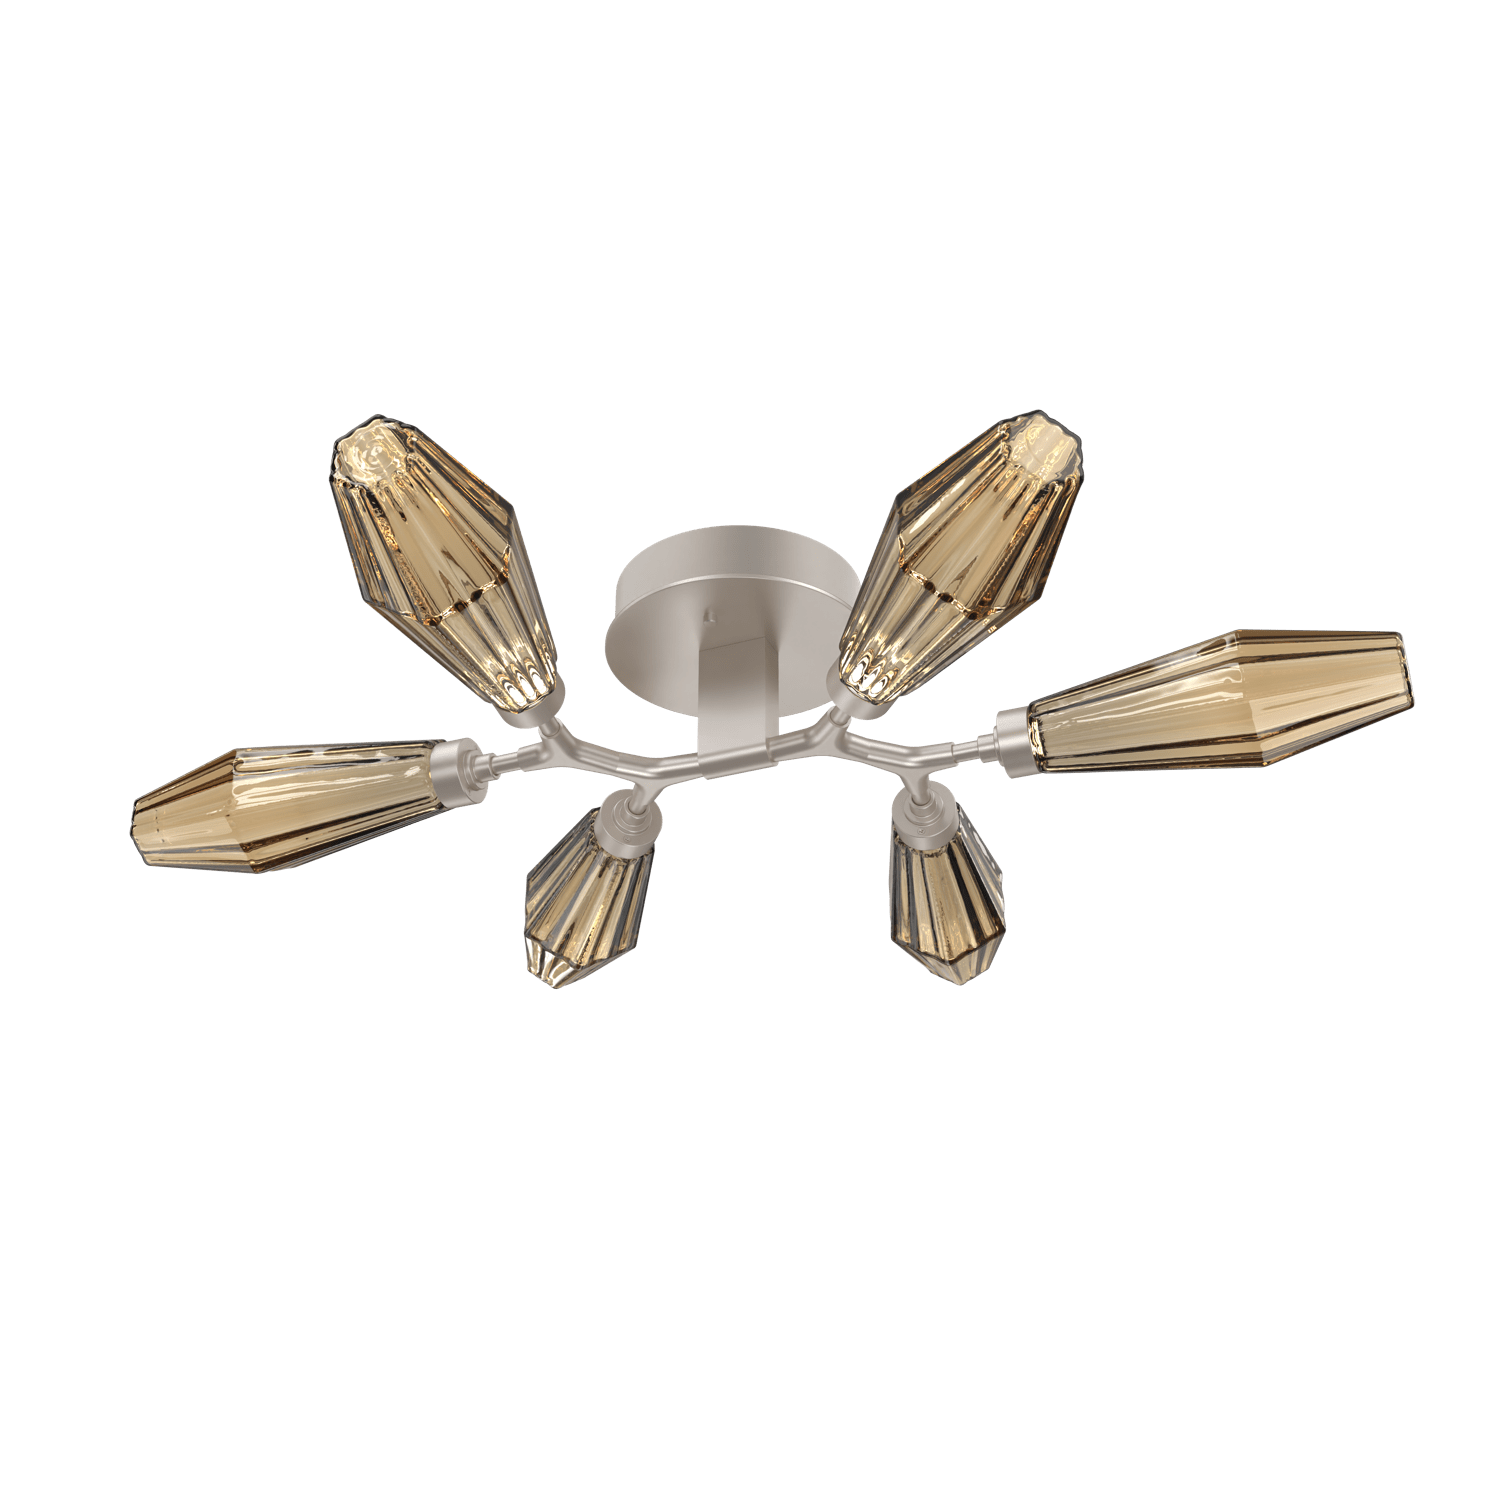 CLB0049-01-BS-RB-Hammerton-Studio-Aalto-6-light-organic-flush-mount-light-with-metallic-beige-silver-finish-and-optic-ribbed-bronze-glass-shades-and-LED-lamping